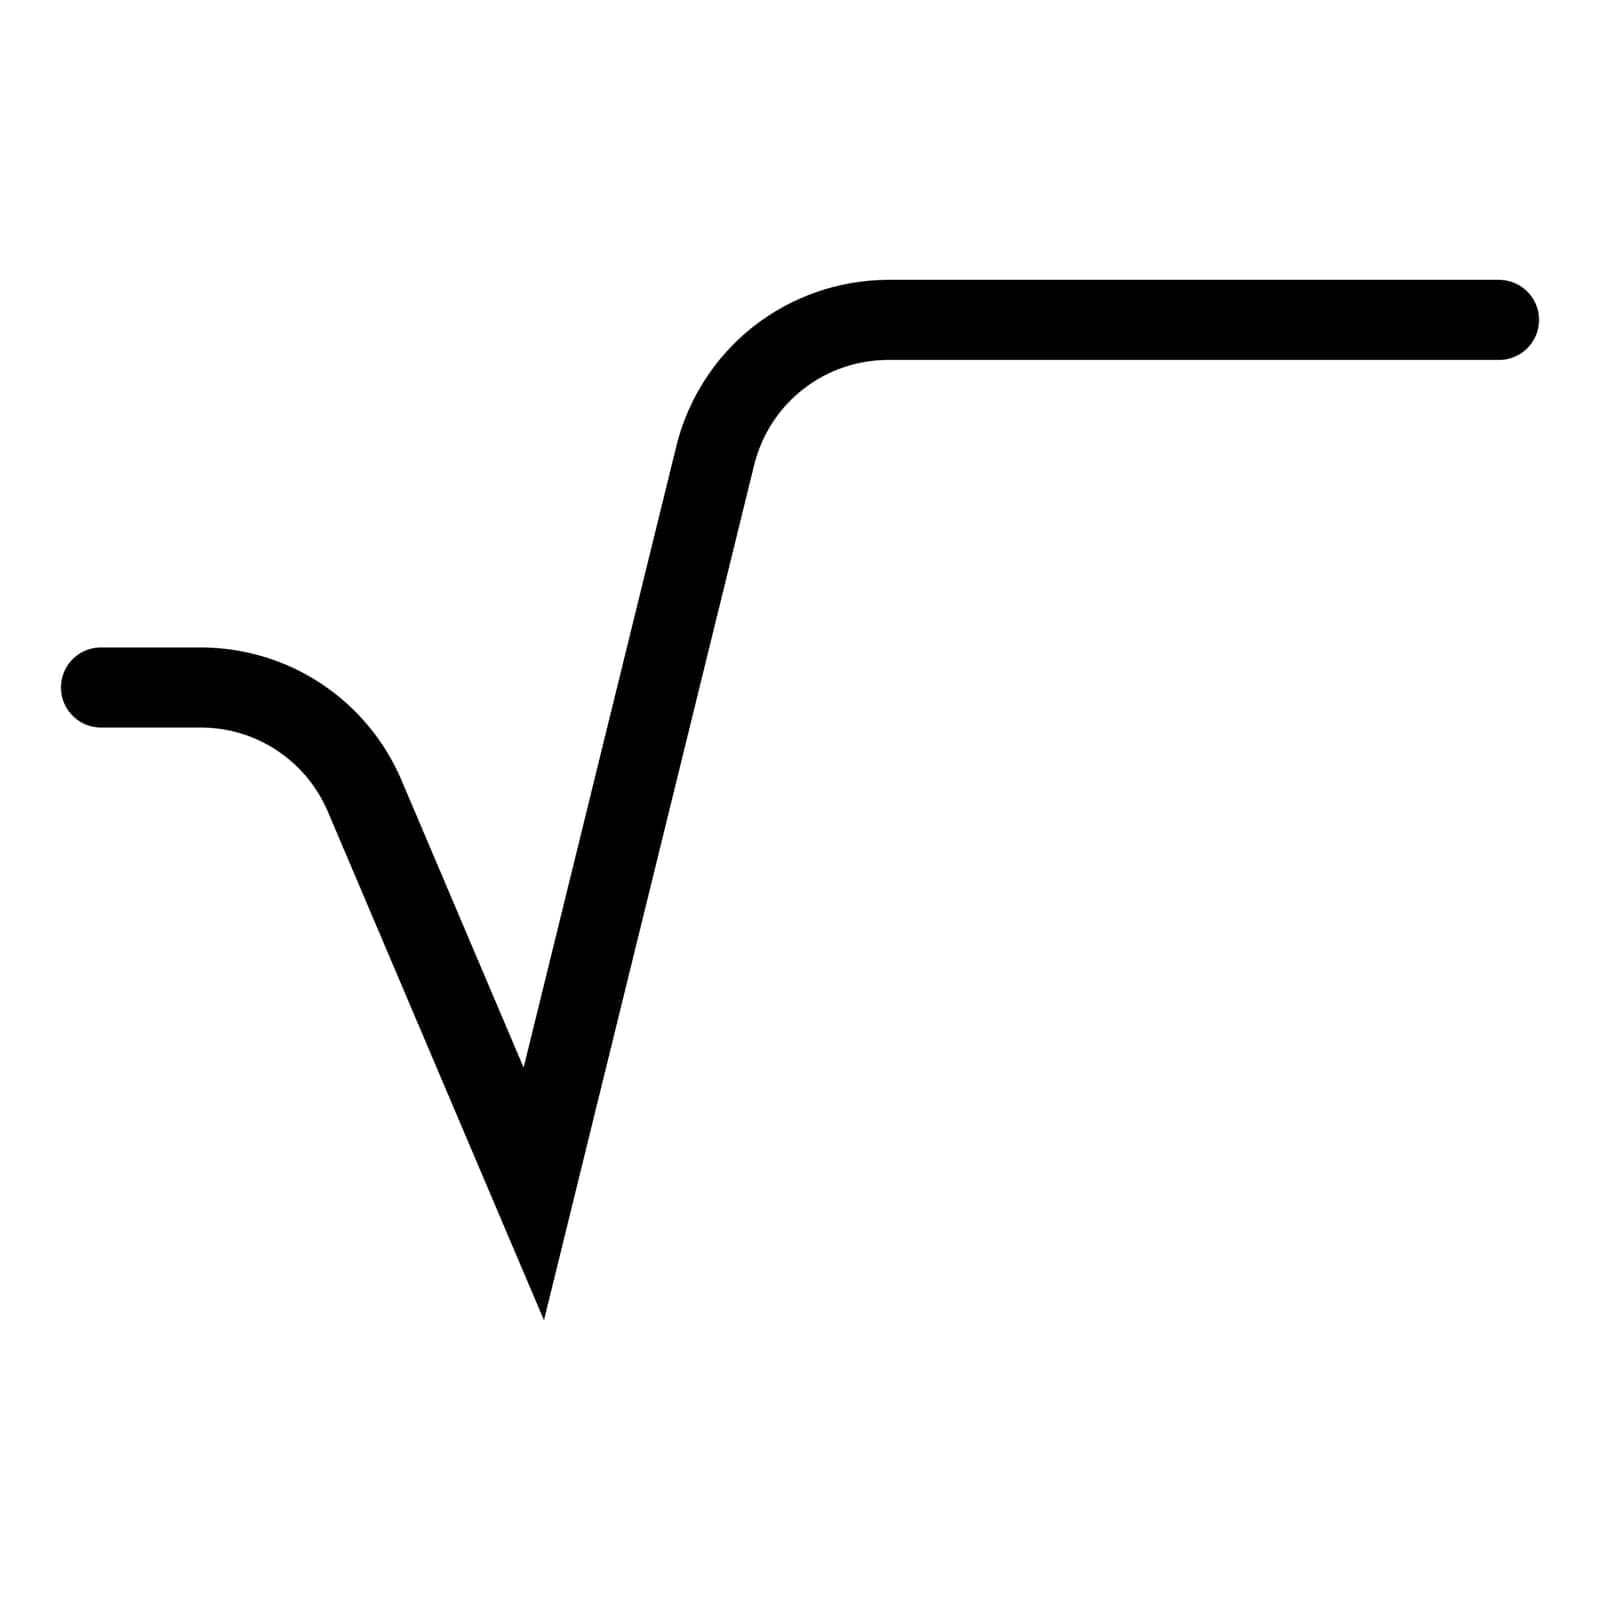 Mathematical sign square root, square root icon for calculations by koksikoks